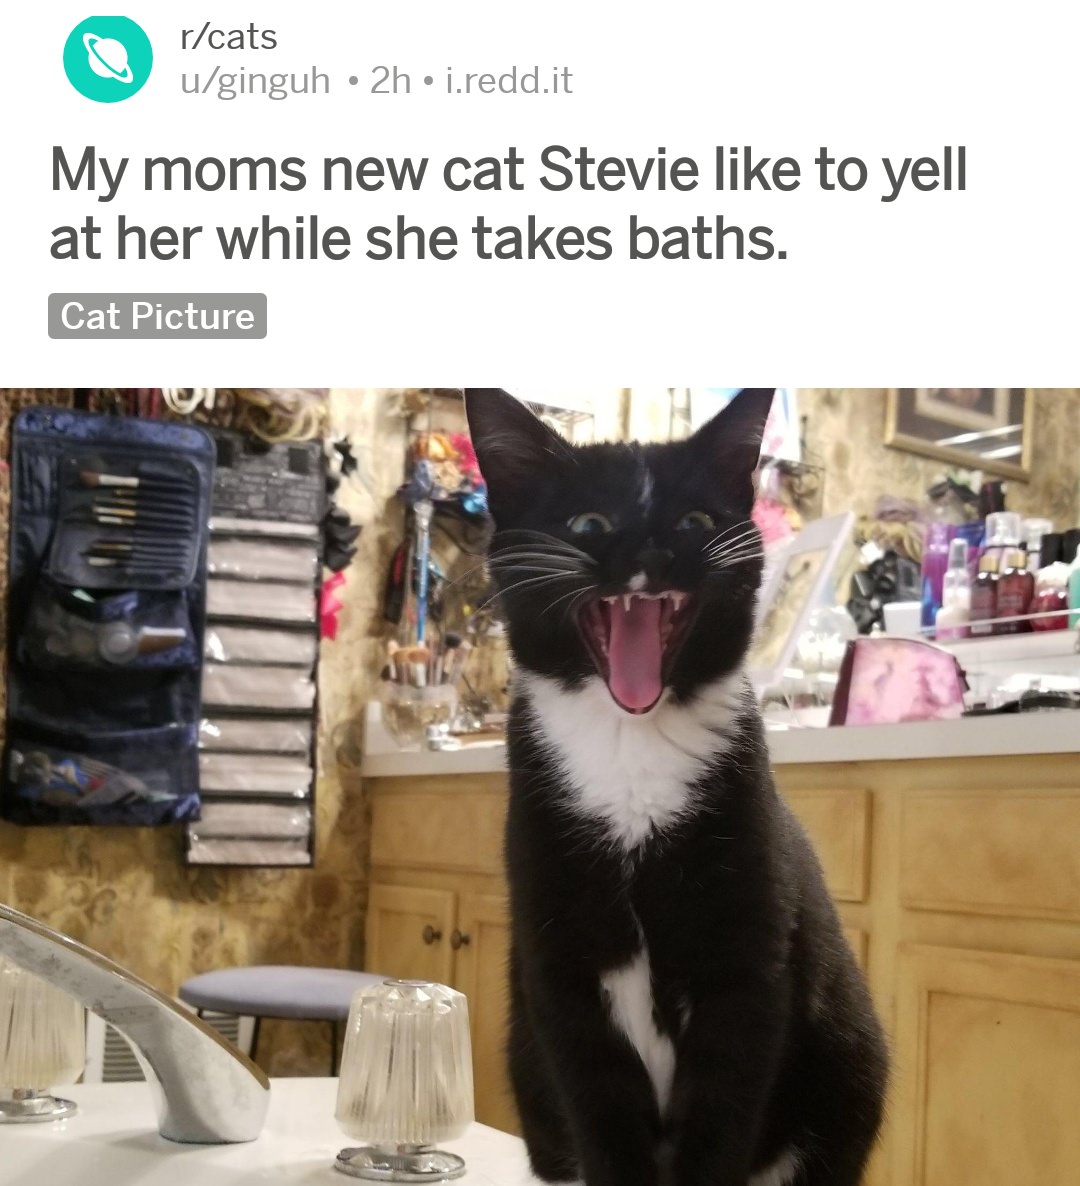 photo caption - rcats uginguh 2h j.redd.it My moms new cat Stevie to yell at her while she takes baths. Cat Picture